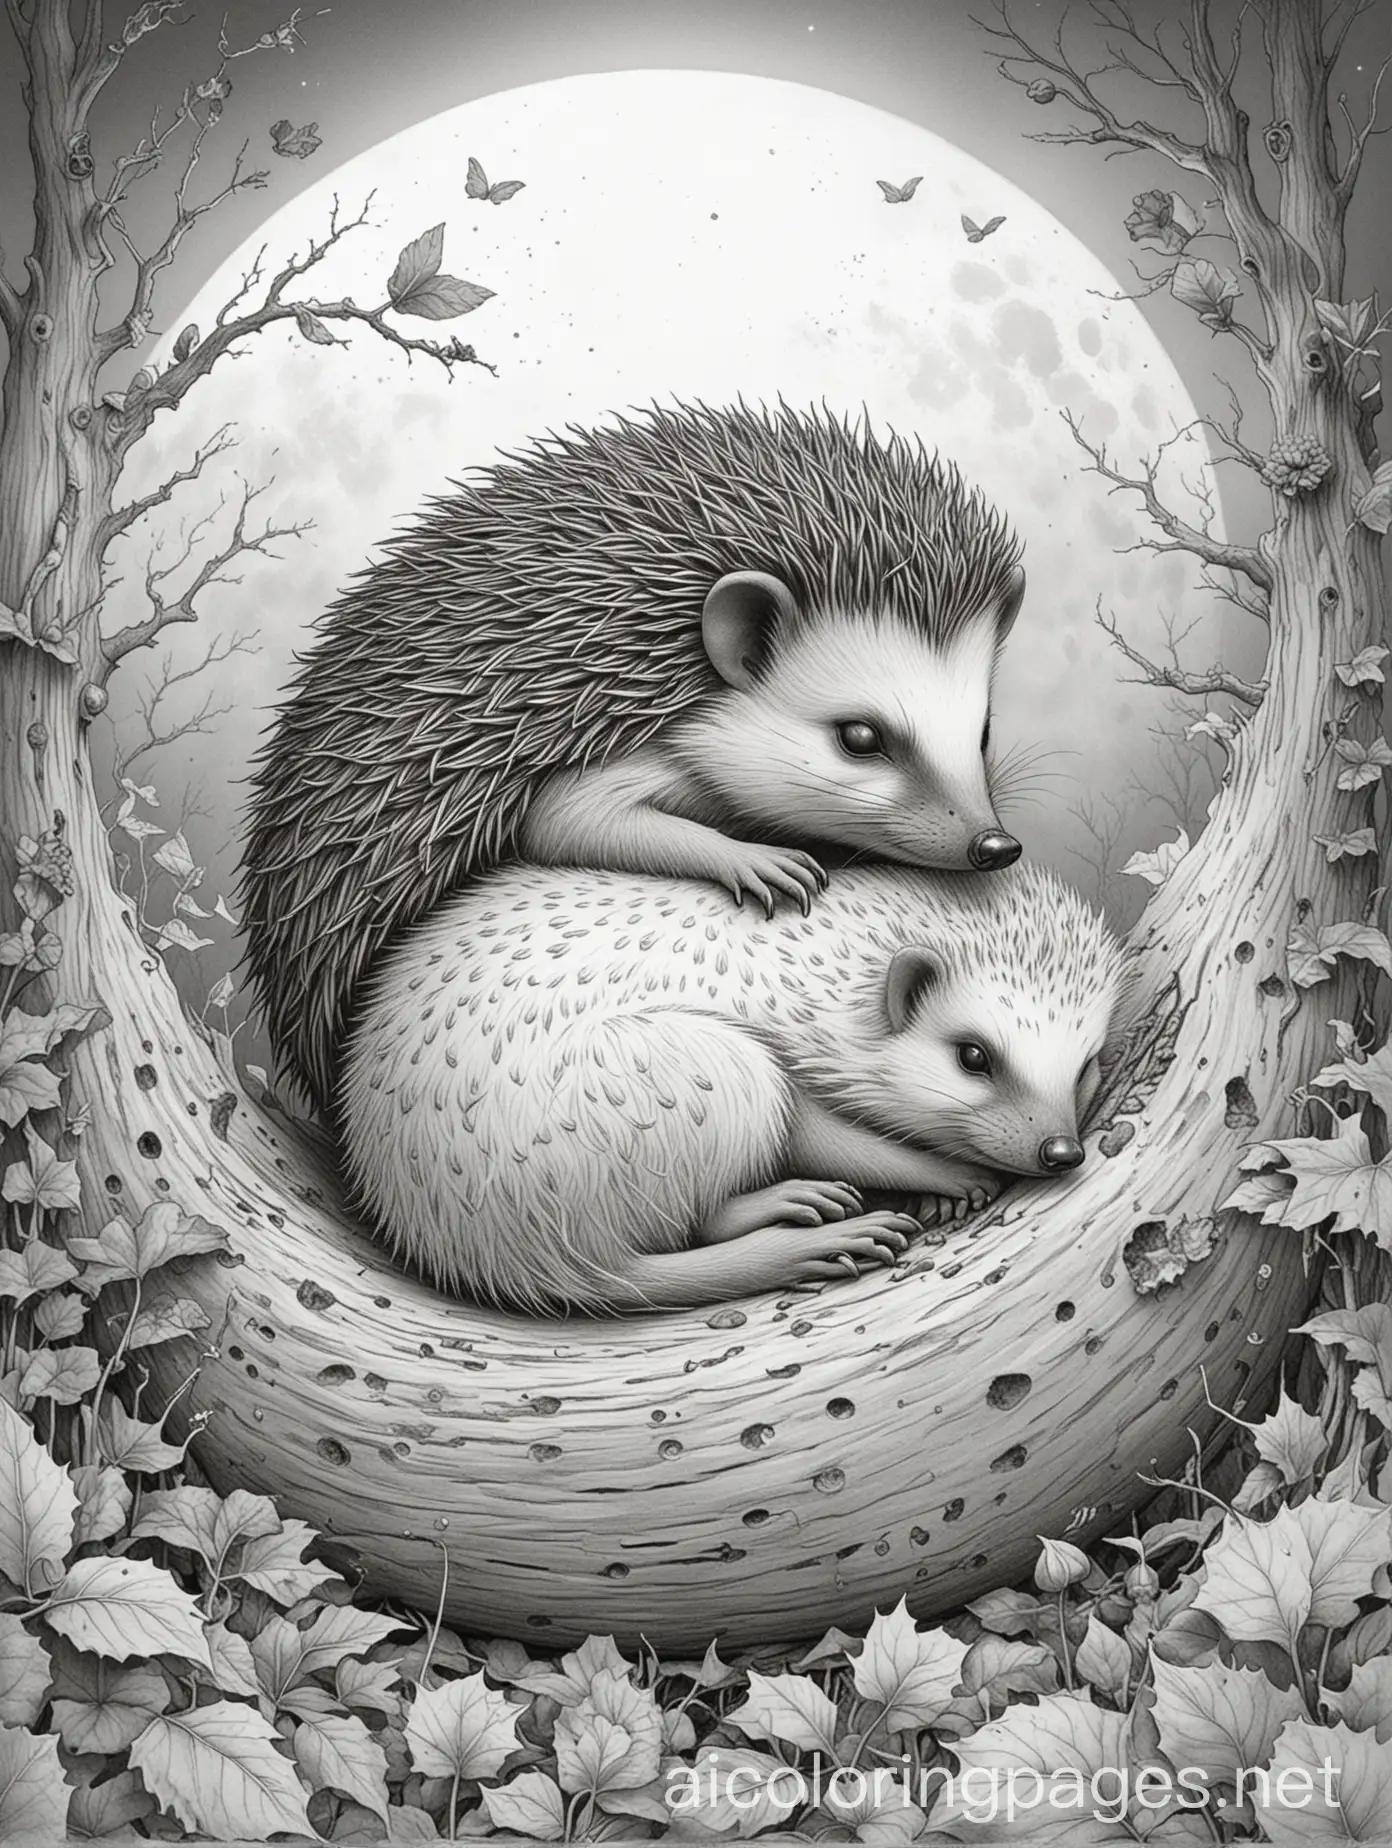 beneath an ivory moon, the hedgehog lay sleeping, Jean-Baptiste Monge style, Coloring Page, black and white, line art, white background, Simplicity, Ample White Space. The background of the coloring page is plain white to make it easy for young children to color within the lines. The outlines of all the subjects are easy to distinguish, making it simple for kids to color without too much difficulty